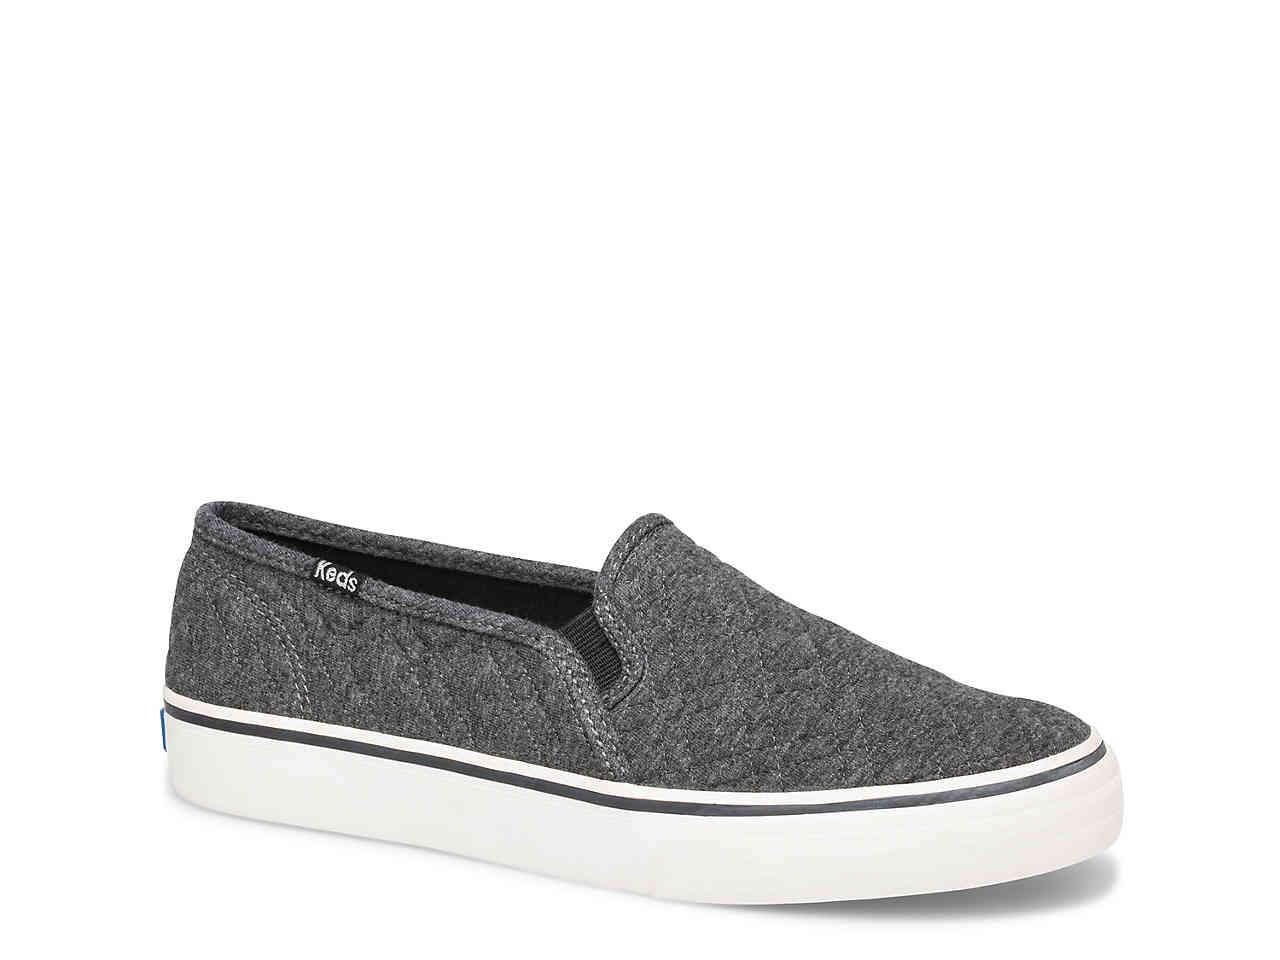 Keds Double Decker Slip-on Sneaker in Charcoal (Gray) - Save 34% - Lyst